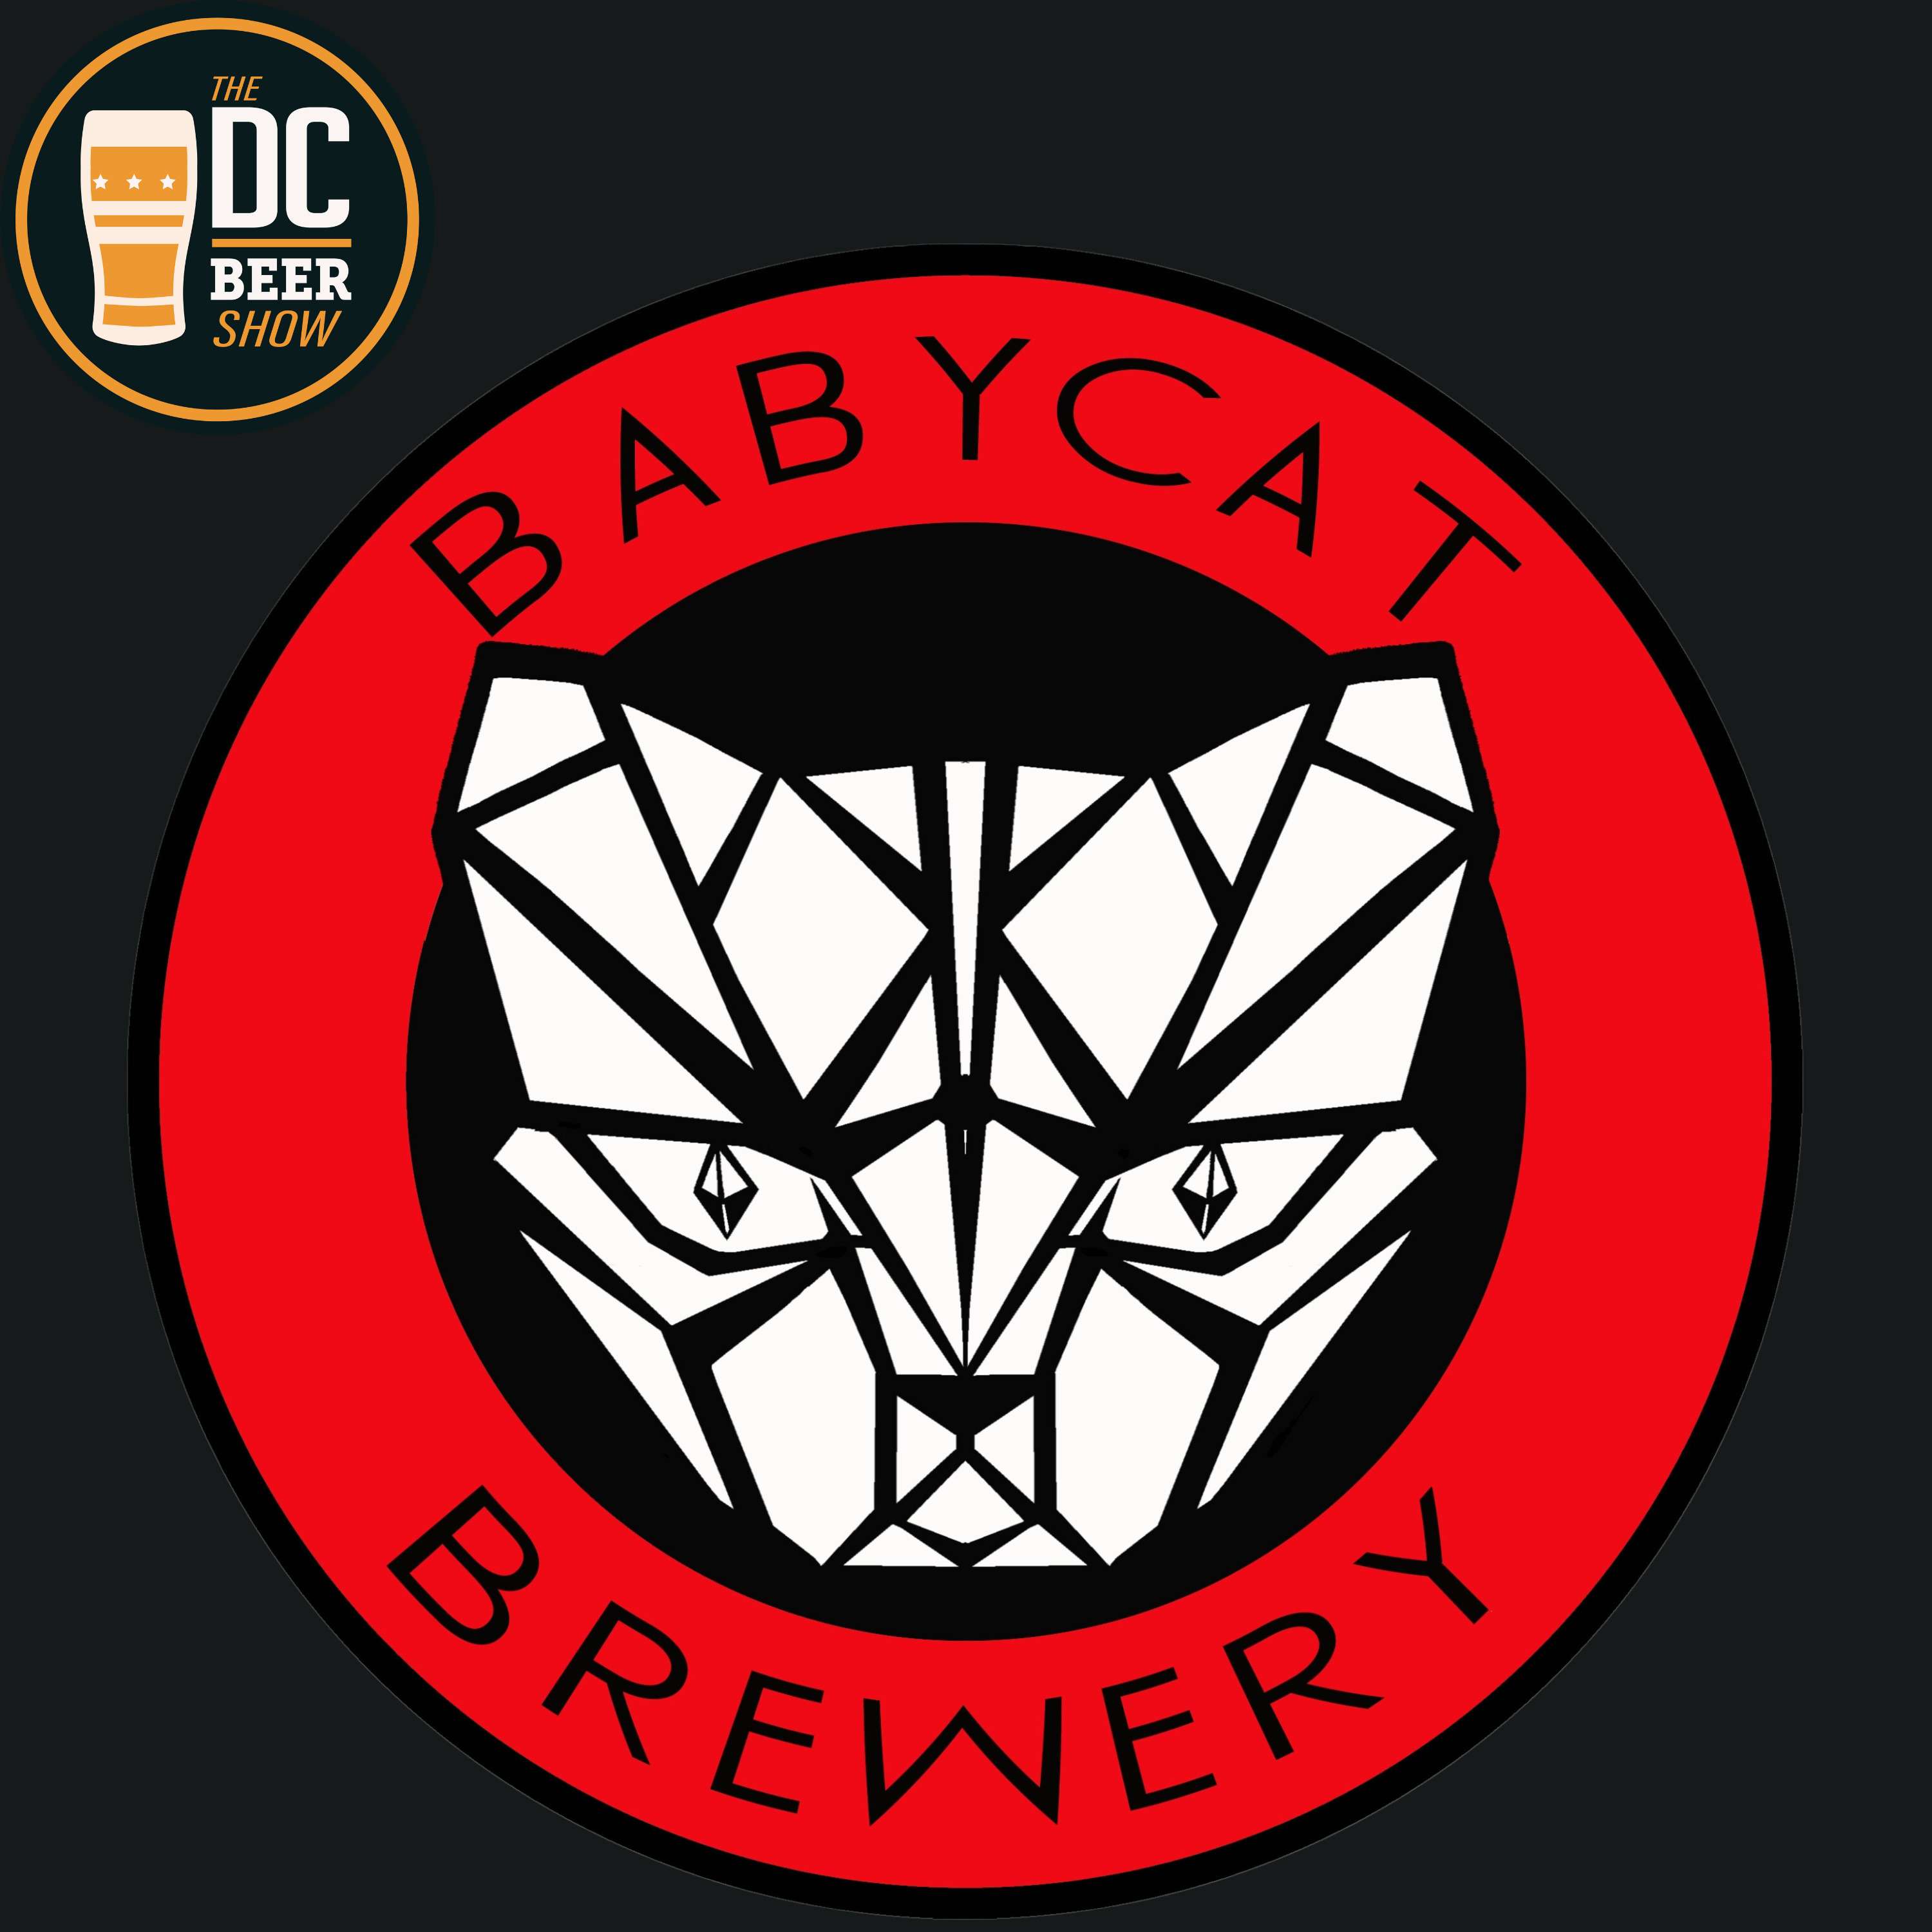 BabyCat Brewery and More Great Events